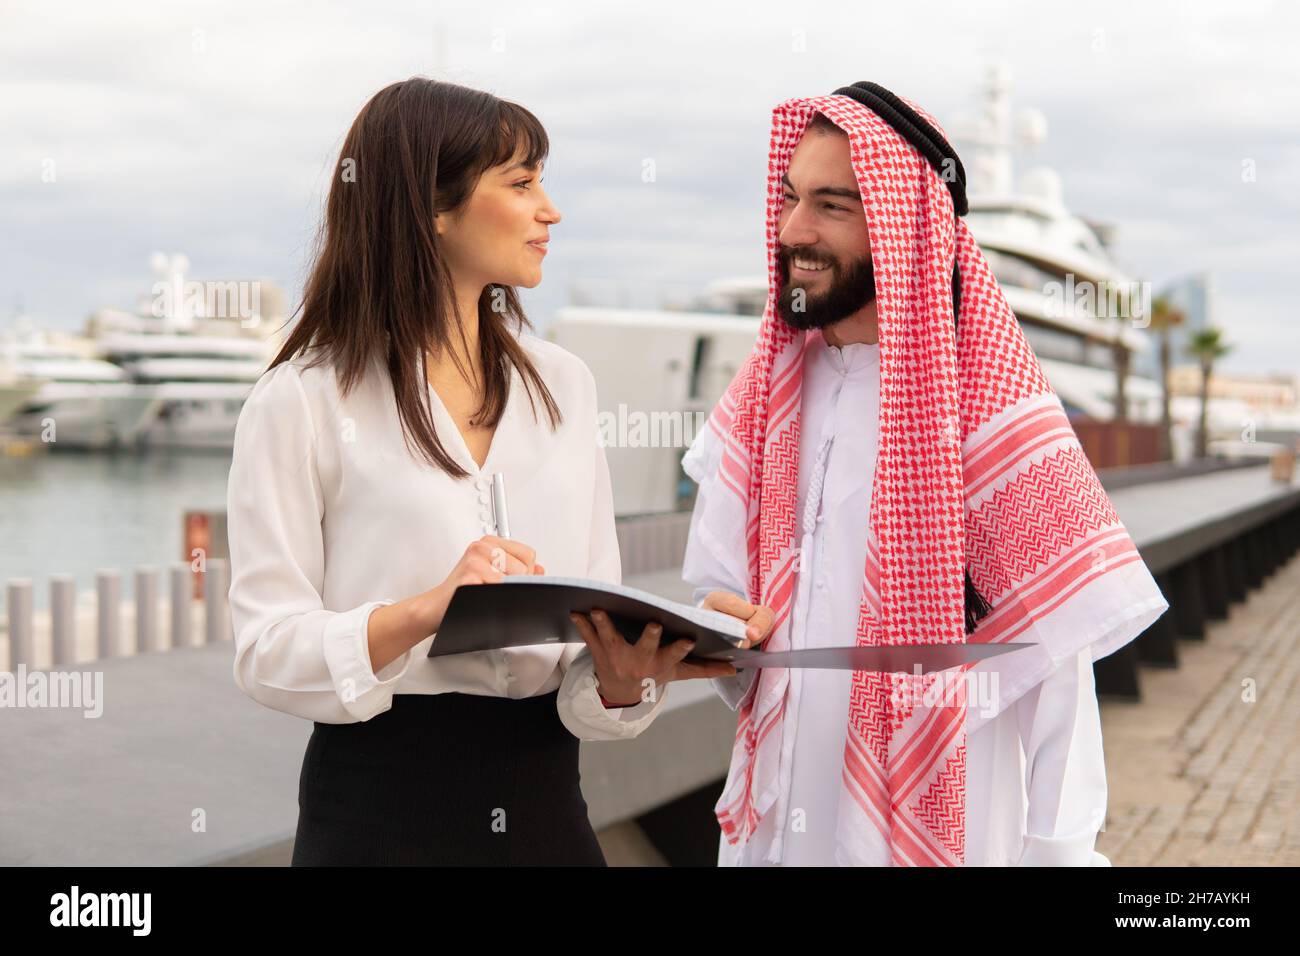 Young friendly europian businesswoman explaning contract details to arab man client during outdoor meeting in port, waiting saudi male business partner to sign document. Diverse partnership concept Stock Photo